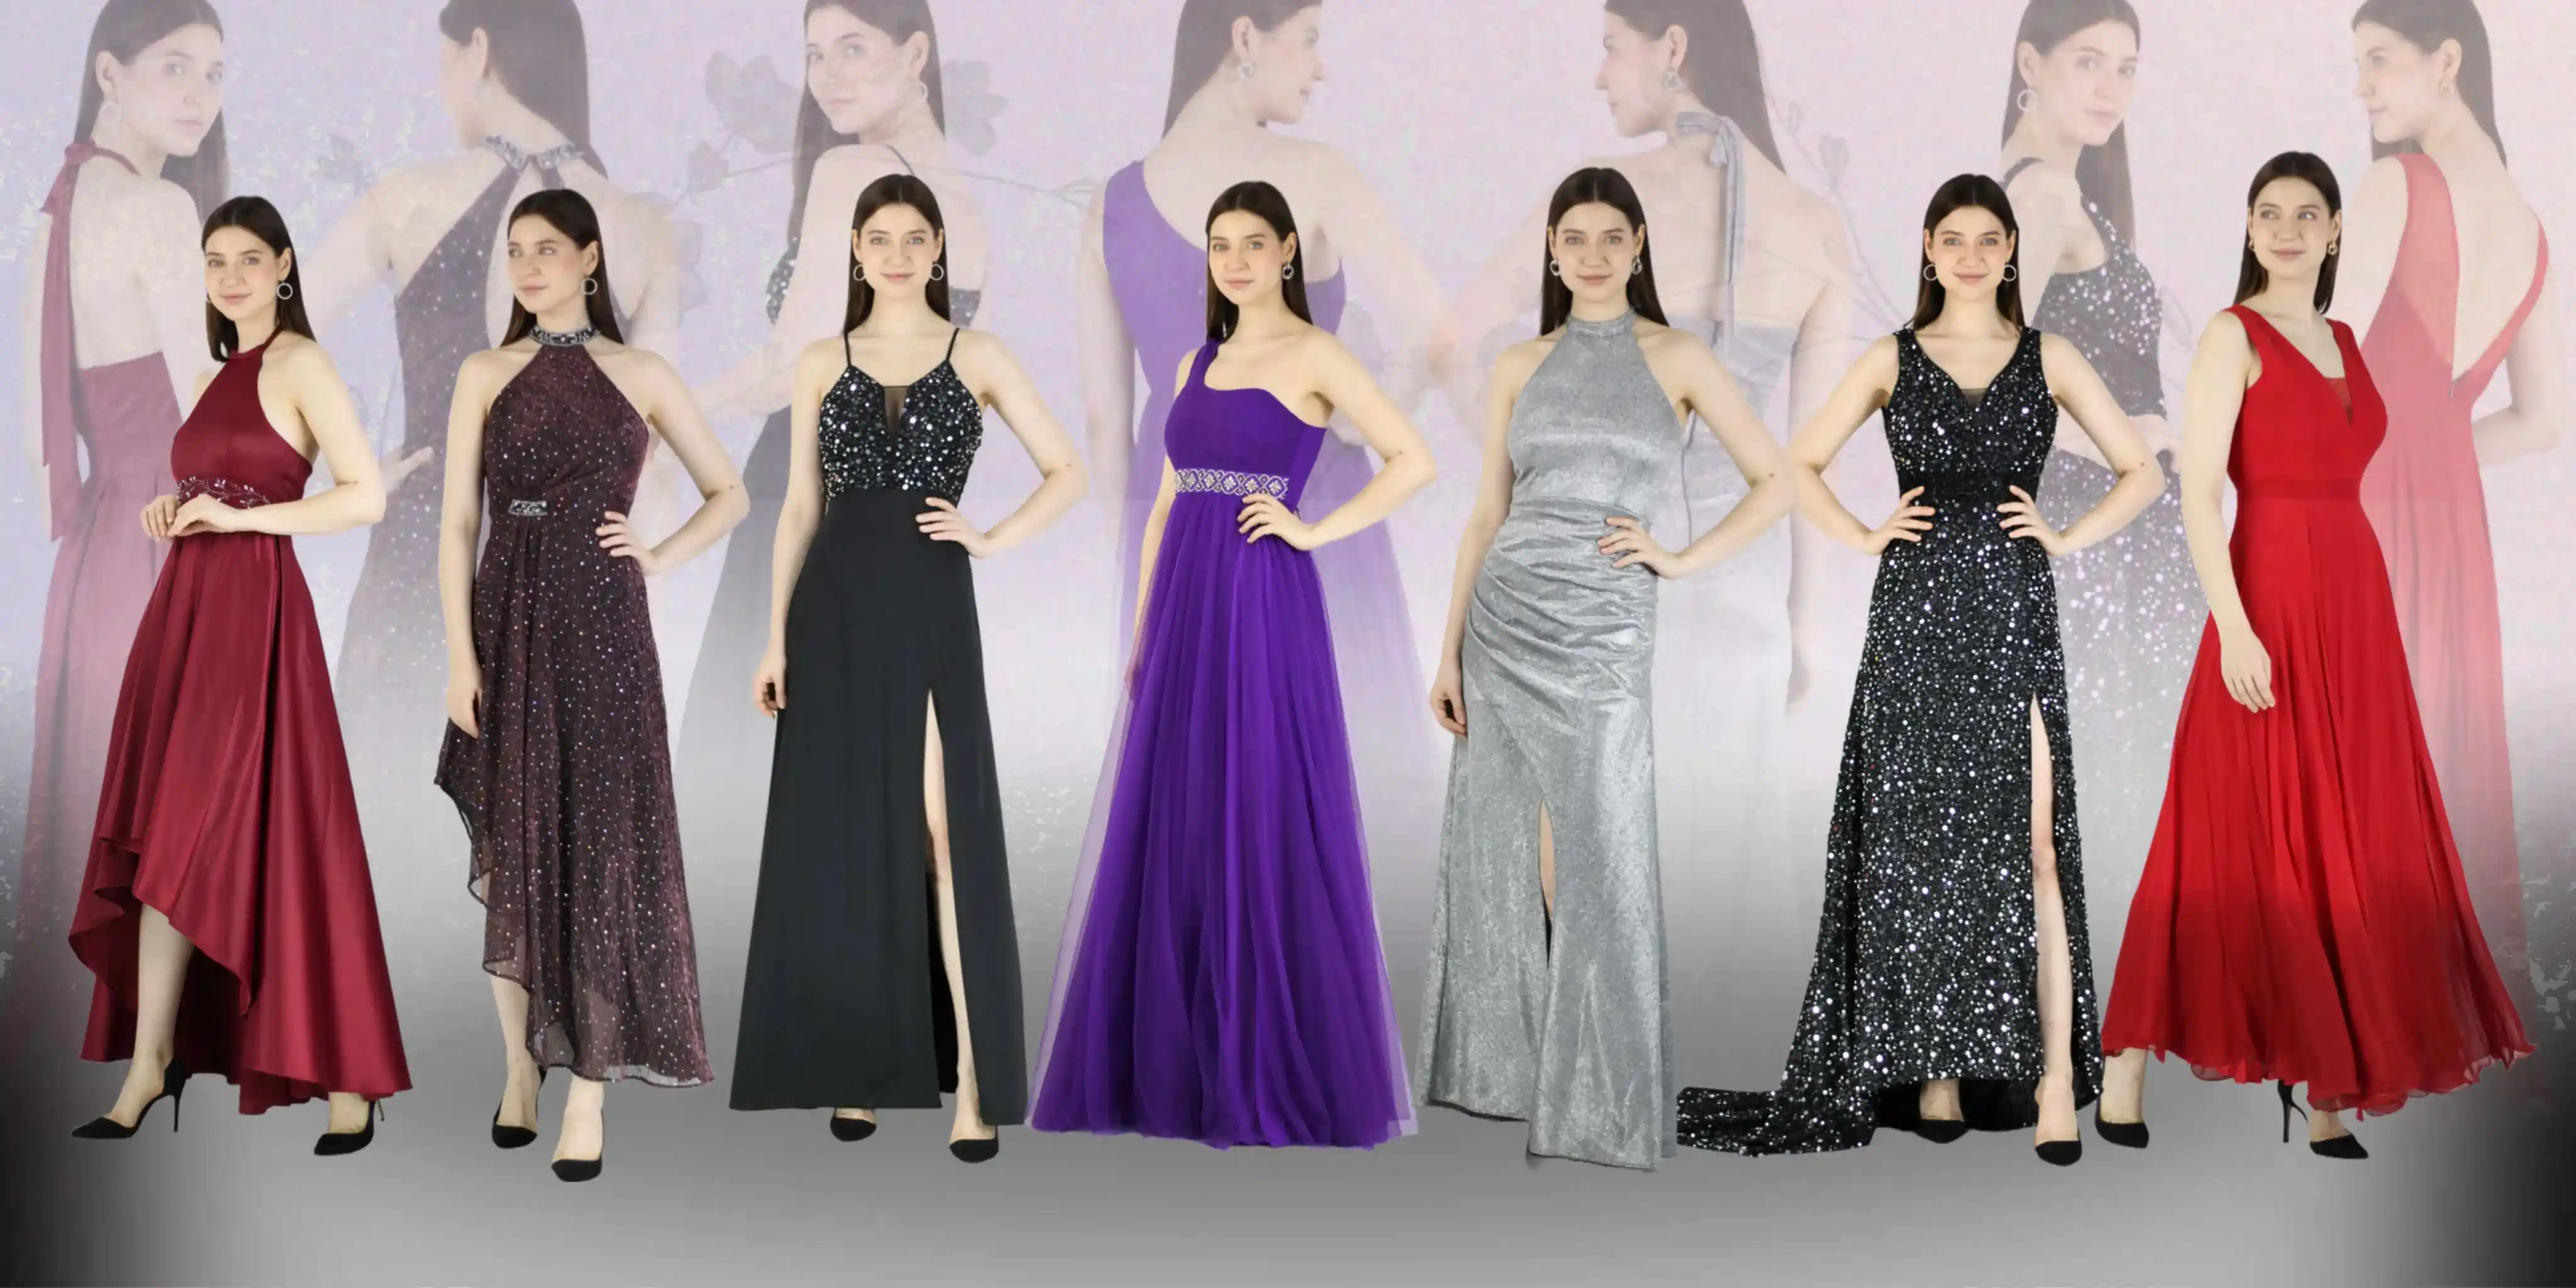 Banner Images with women wearing luxury clothes